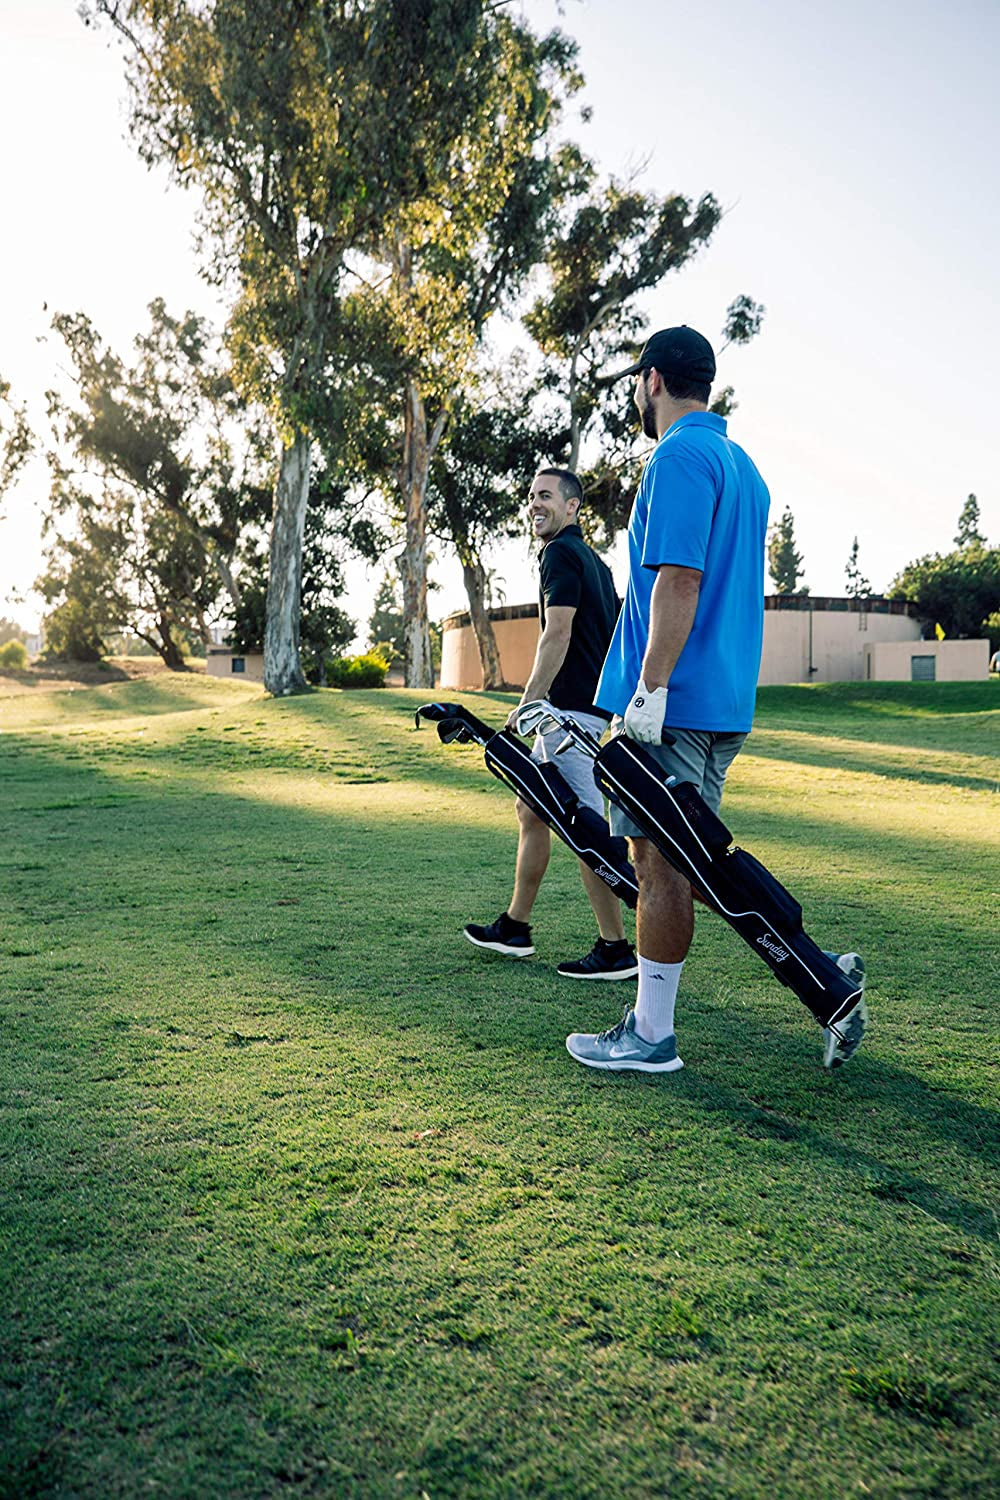 "Premium Stand Bag - The Ideal Lightweight and Durable Golfing Companion for On-the-Go Excellence!"